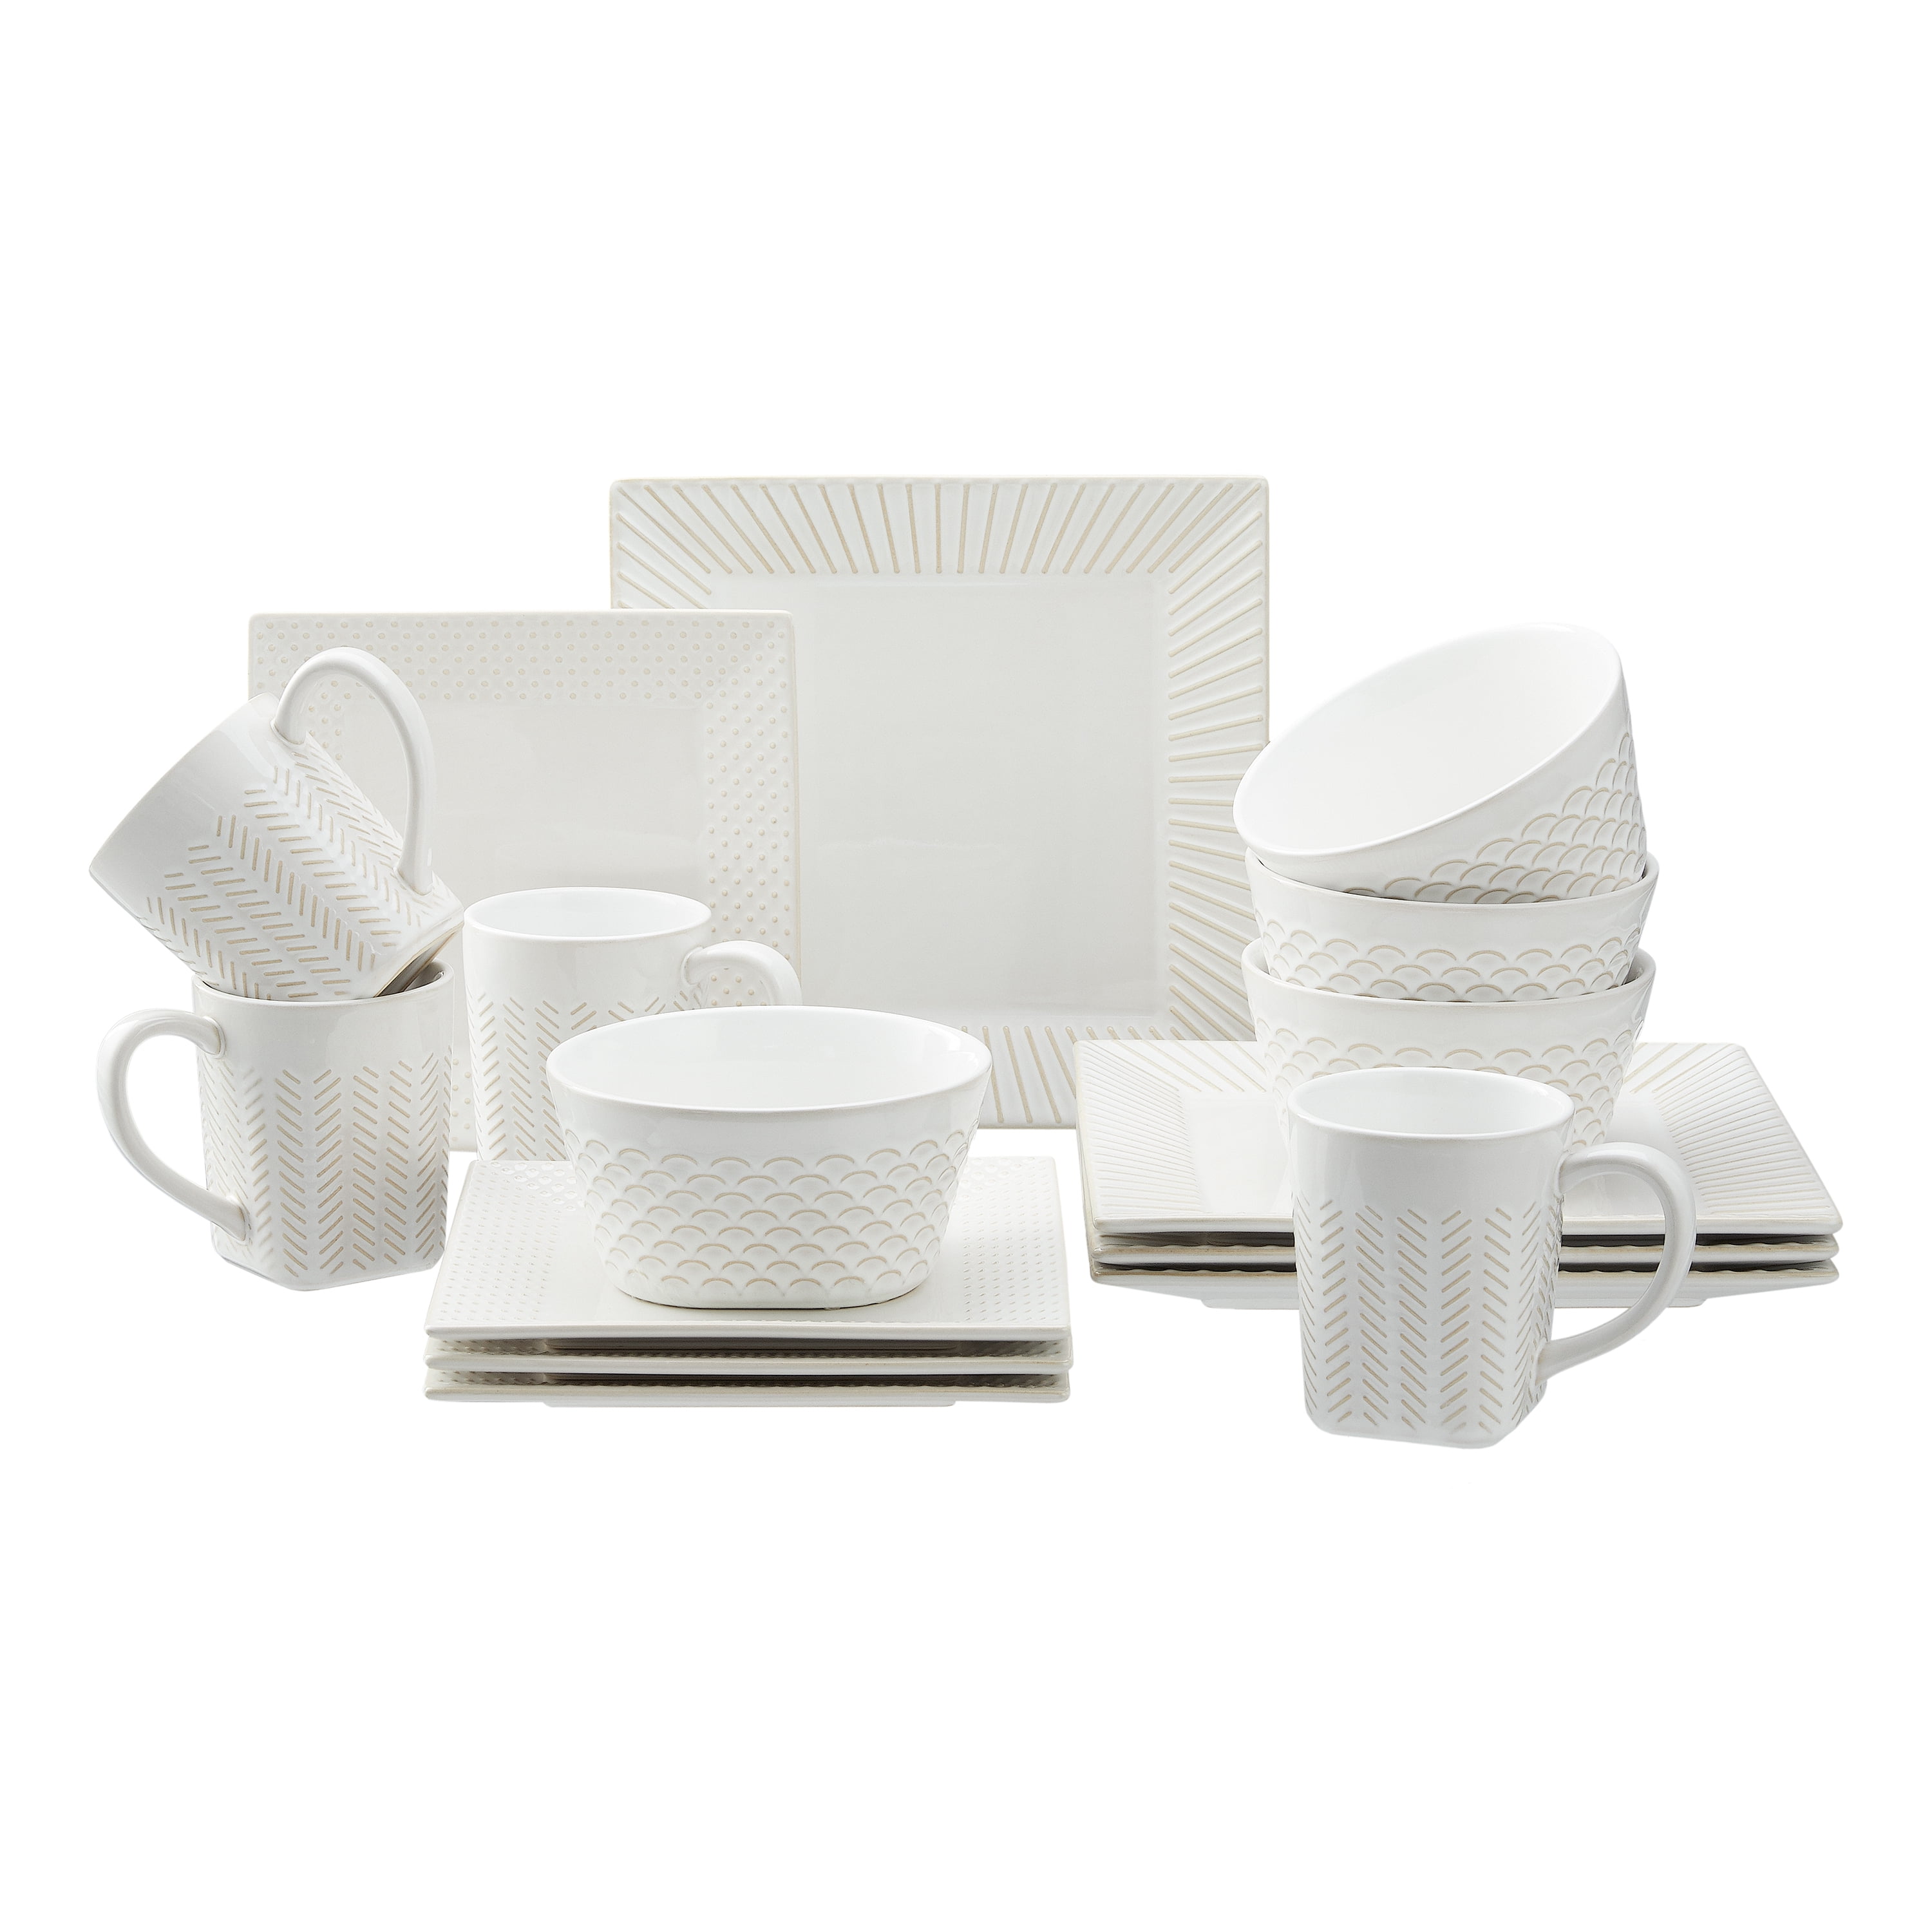 Details about   Corelle Classic Mystic Gray 16-Piece Dinnerware Set FREE SHIPPING 